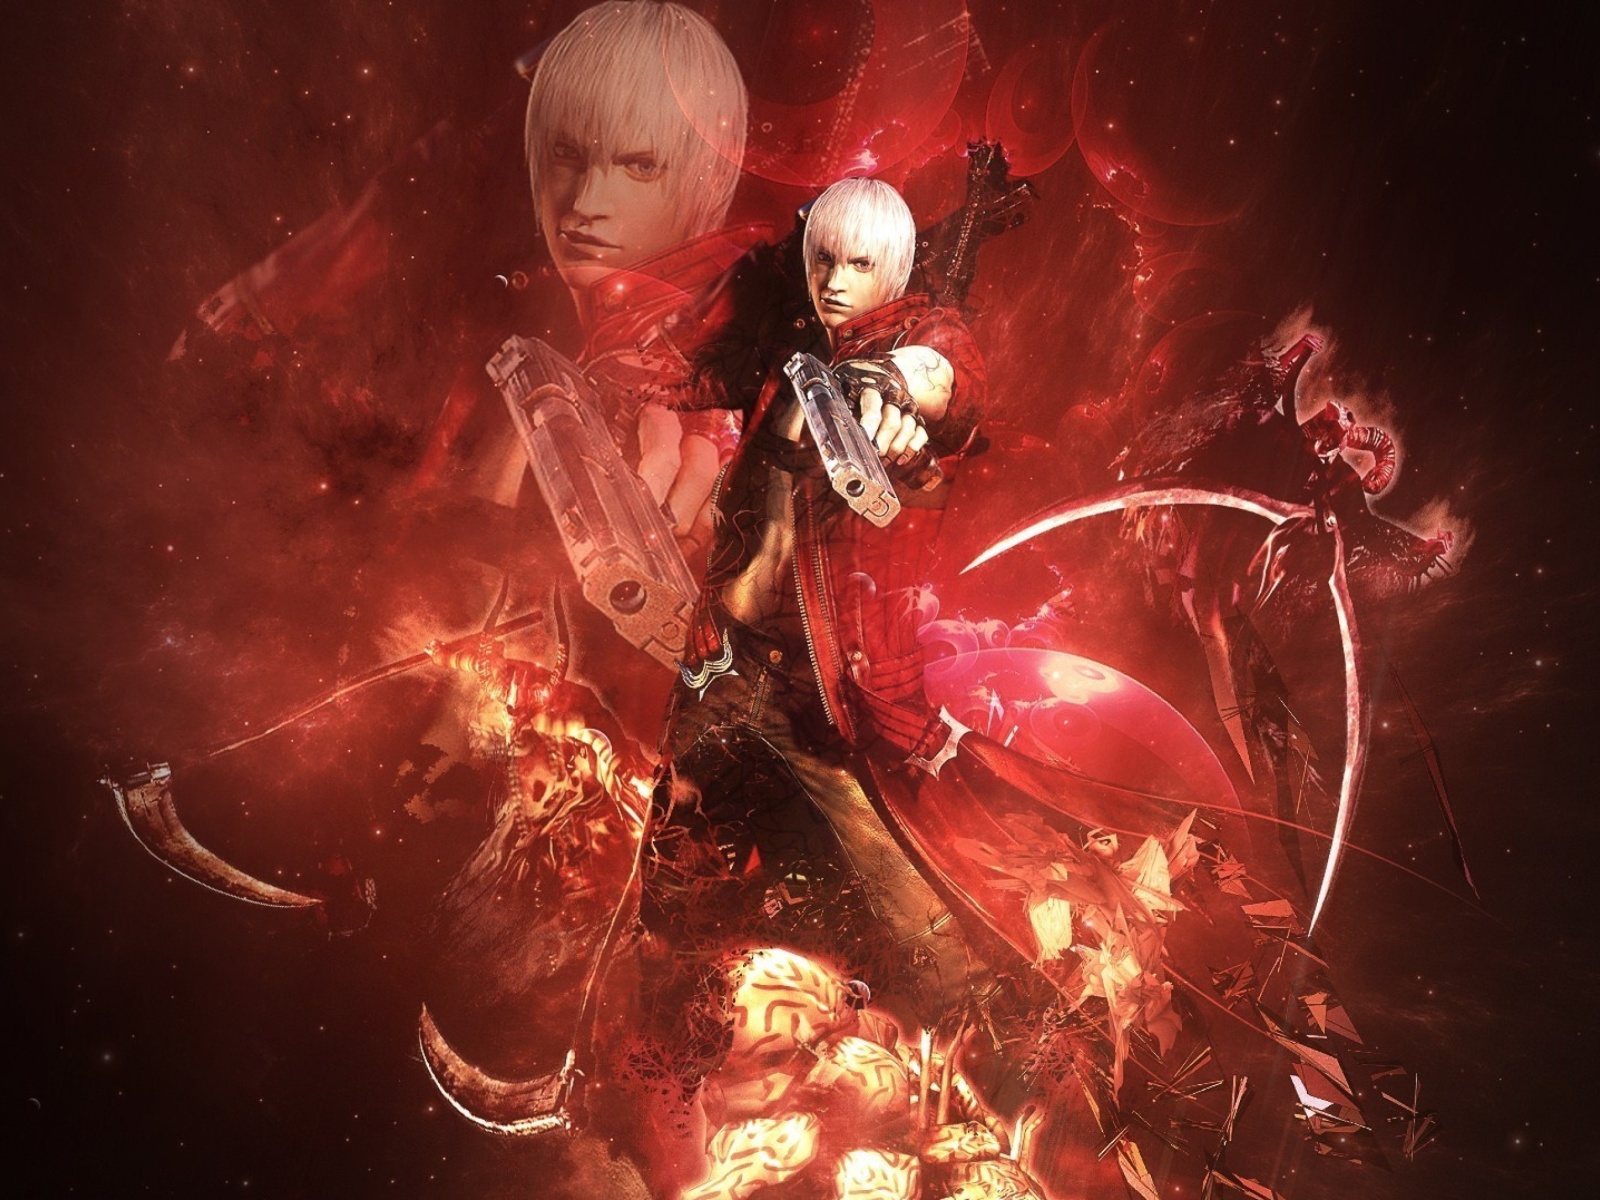 Devil may cry 3 wallpaper 1600x1200